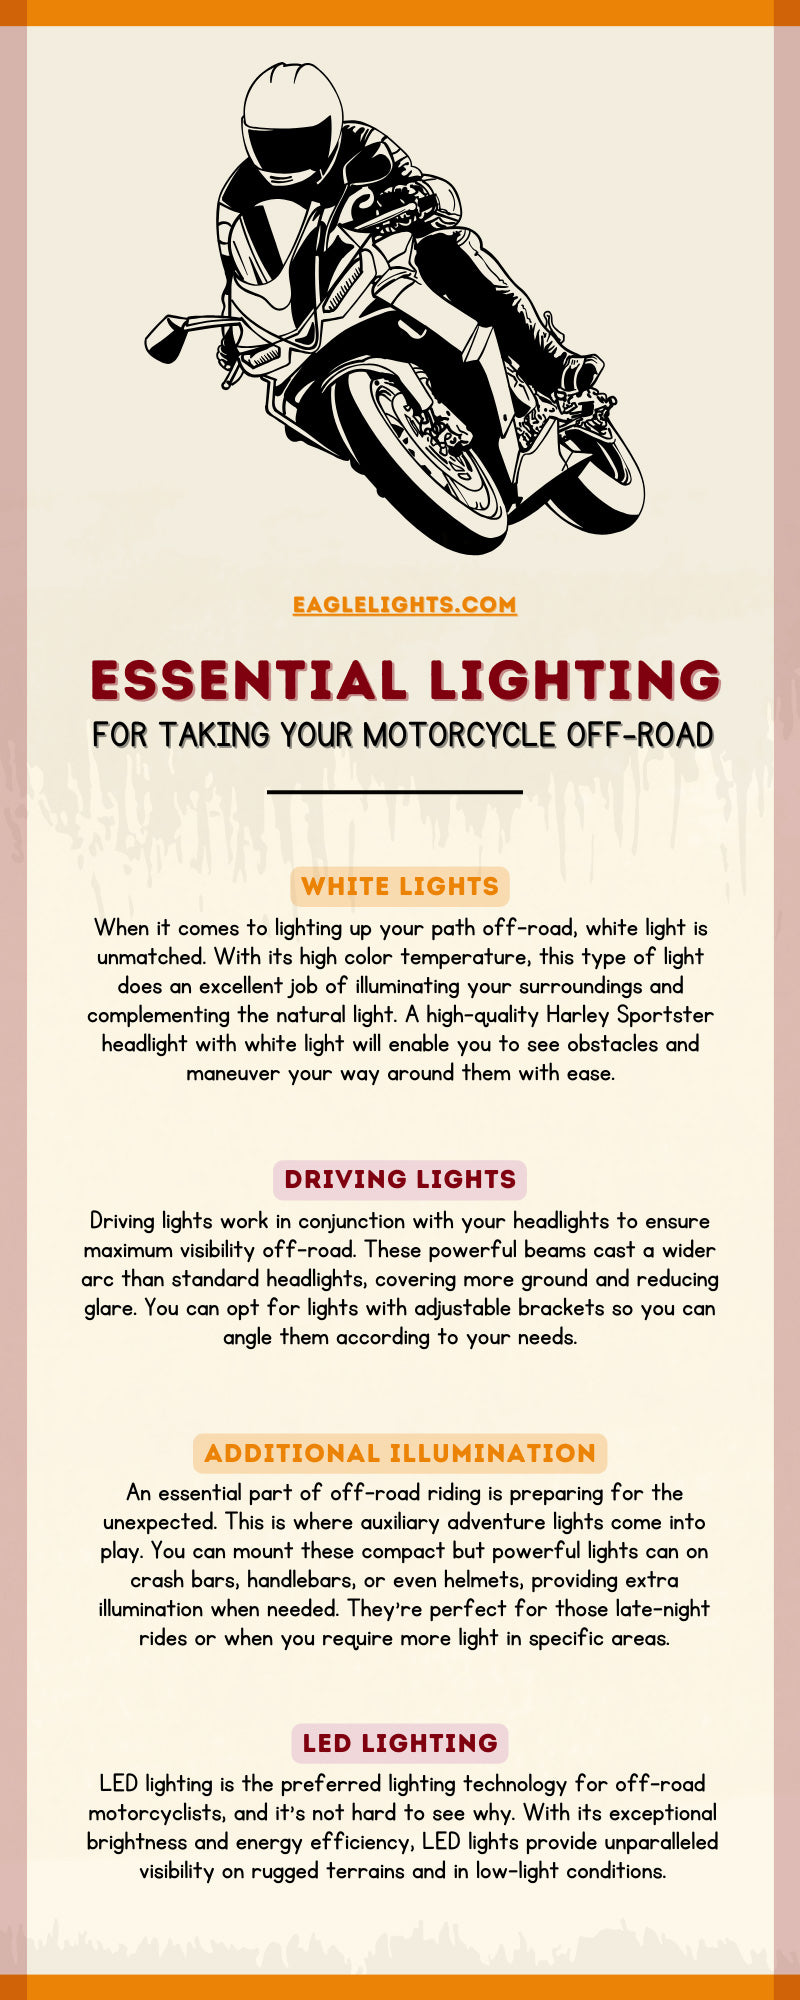 Essential Lighting for Taking Your Motorcycle Off-Road